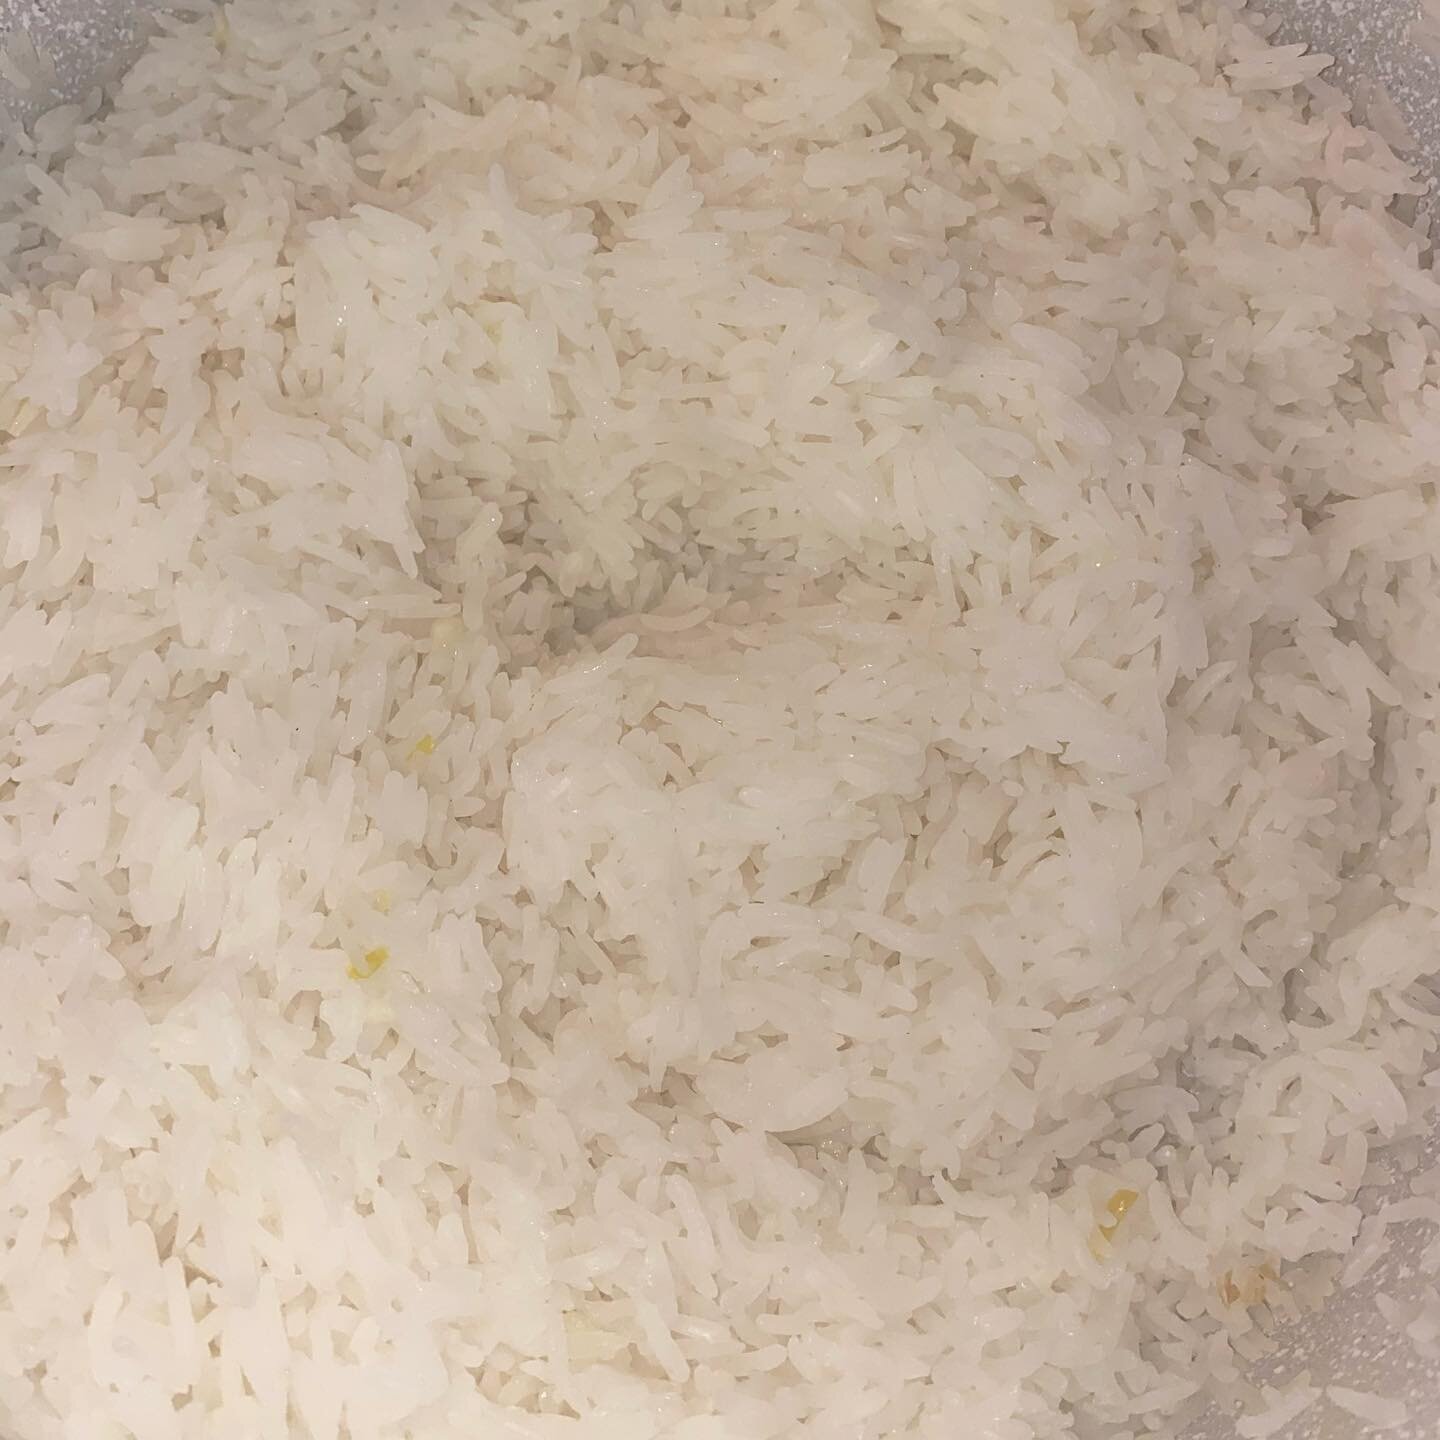 Garlic infused rice 🧄🍚One of my uncles taught me this trick. 

Ingredients: 
Rice, 3 cups
Garlic cloves, 2, mashed
Sea salt, 1 tsp 
Water, 3 cups 

Steps:
1. Soak rice overnight.  Then, rinse once or twice, and drain. 
3. To a warm pot, add the gar